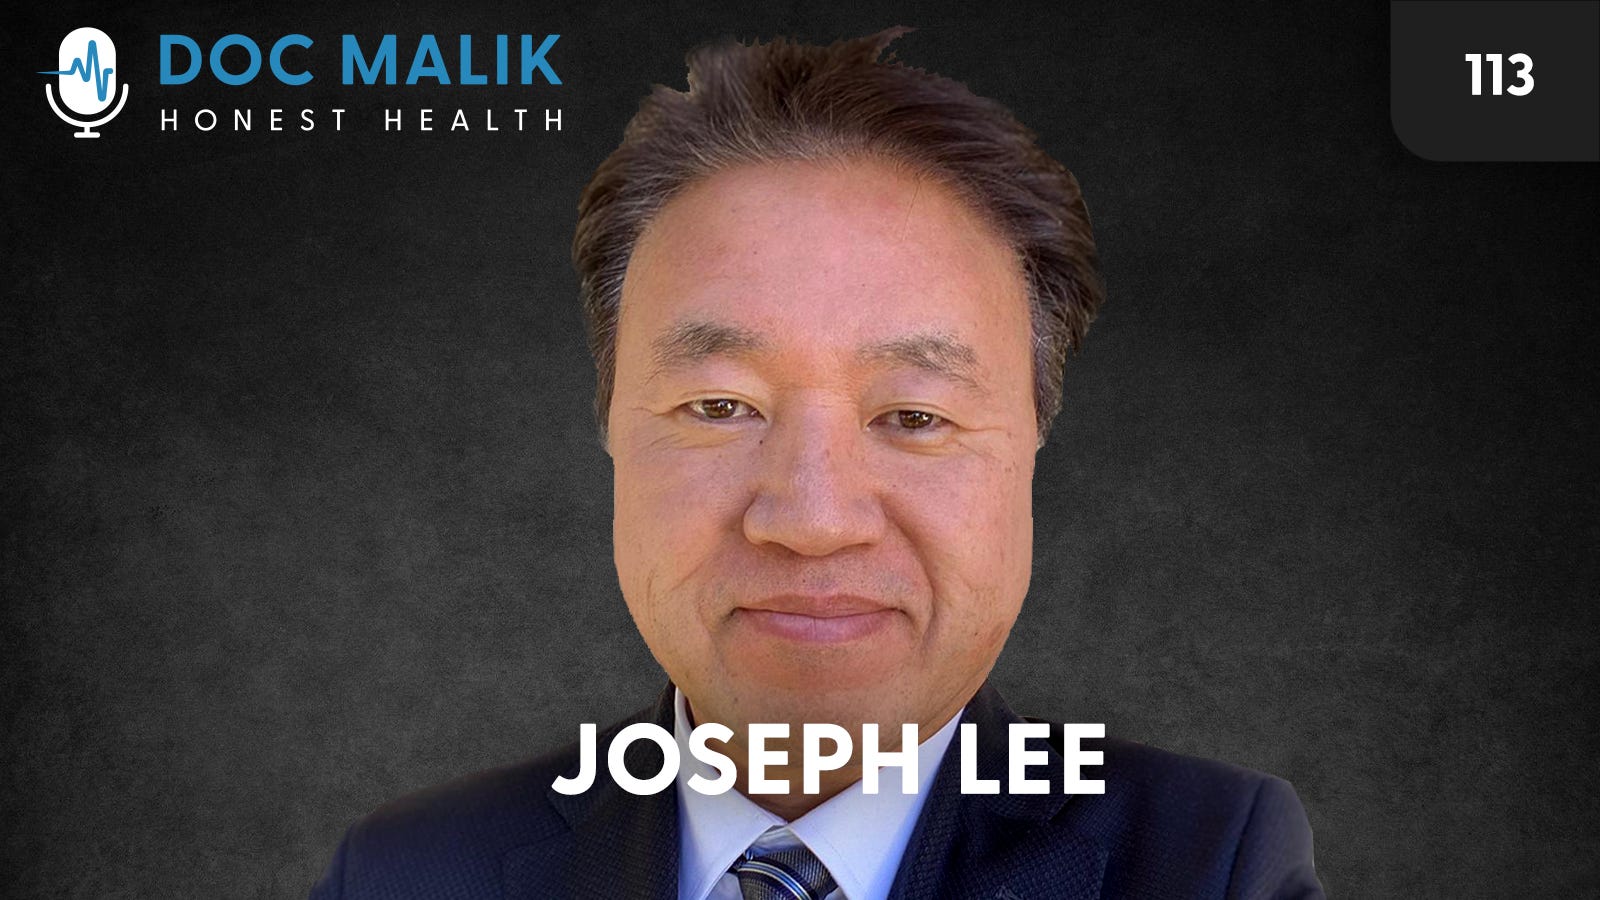 #113 - Dr Joseph Lee MD Discusses His String Theory Regarding Why mRNA Jabs Cause Clots, Cults And More